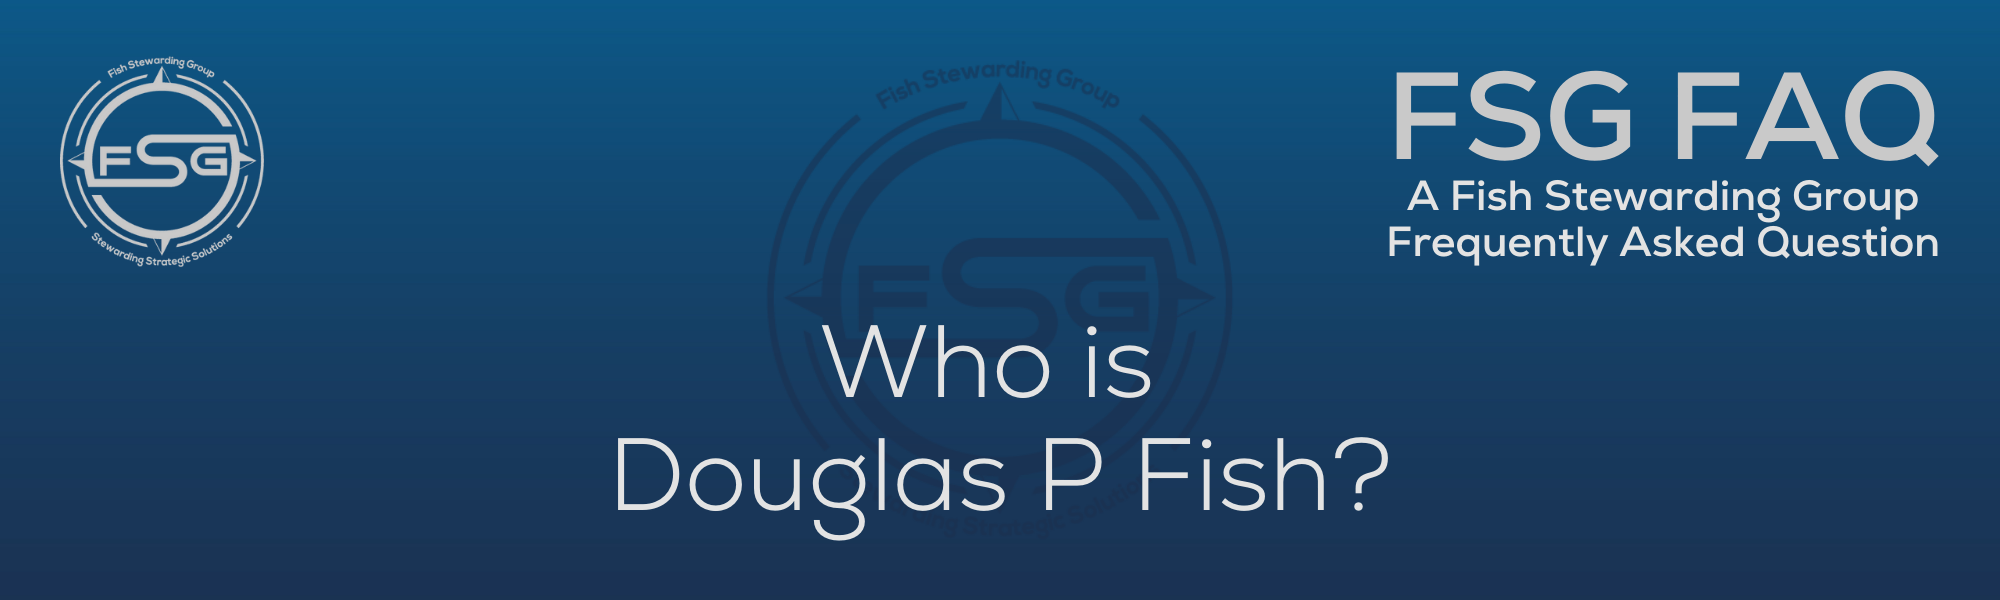 A rectangular and long thing Footer FAQ Image on the bottom of the Who is Douglas P Fish? Page on the website. The background is a blue gradient color that goes from a dark blue on the bottom to a lighter blue on top. The text in lower center of the image in a light gray text that reads: Who is Douglas P Fish? The text in gray in the upper right corner reads: FSG FAQ. Right beneath that is more gray text in a smaller font that reads: A Fish Stewarding Group Frequently Asked Question. On the upper left side is the FSG Logo in gray. The logo has the letters FSG in the middle with a circle with four pointed arrows facing north, south, east and west with the S connected to that circle. Four rounded lines make the next circle of the circle and the last layer is a thin circle with the text on the Bottom that reads Stewarding Strategist Solutions and on top, the text reads Fish Stewarding Group. And Lastly in the center background of the image is a watermarked FSG logo, faded in blue, in the background.